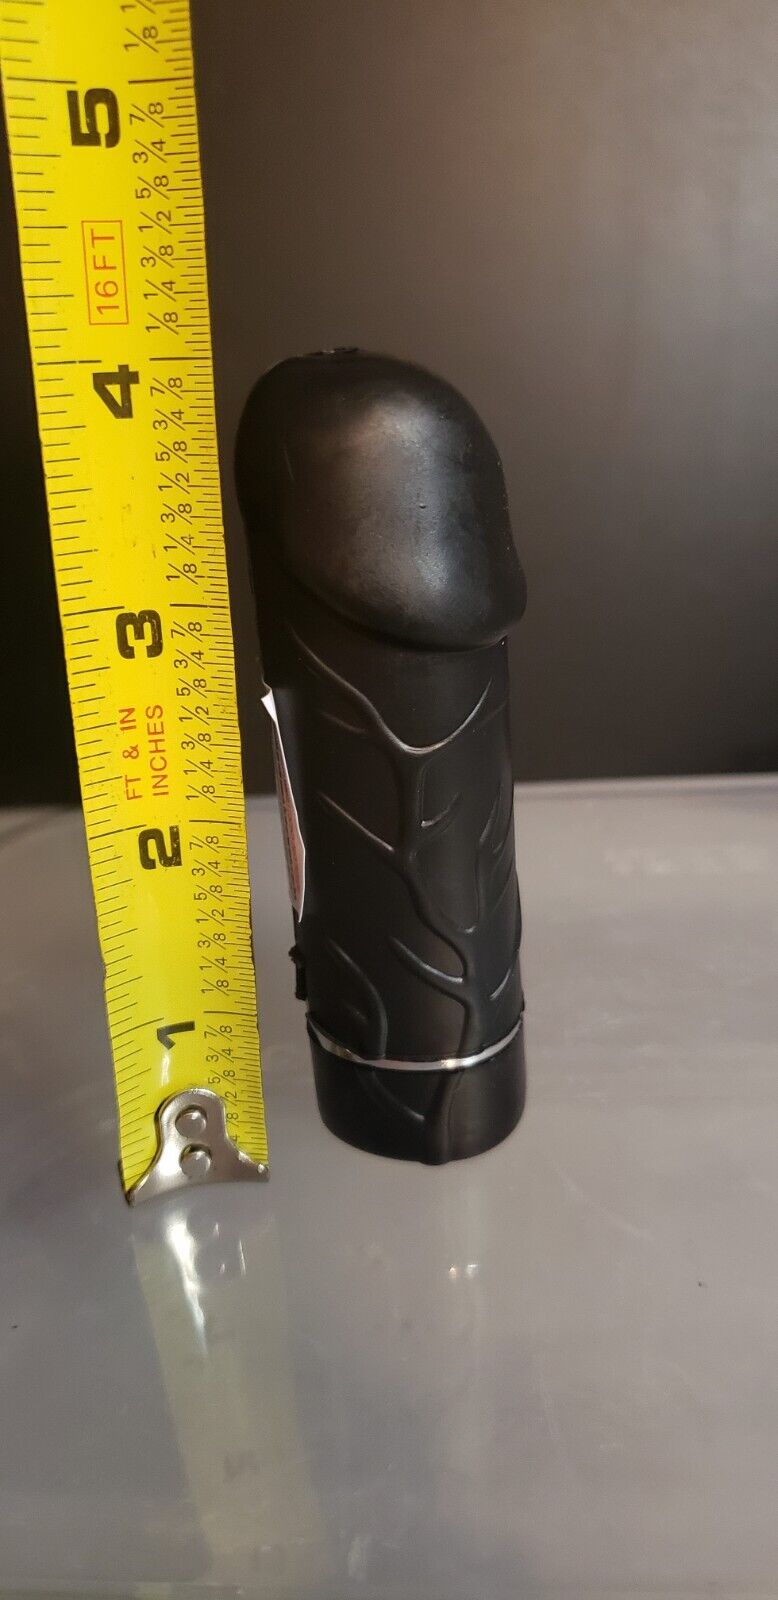 Black Novelty Real Look & Feel Vibrating Penis Dick Refillable Torch Lighter